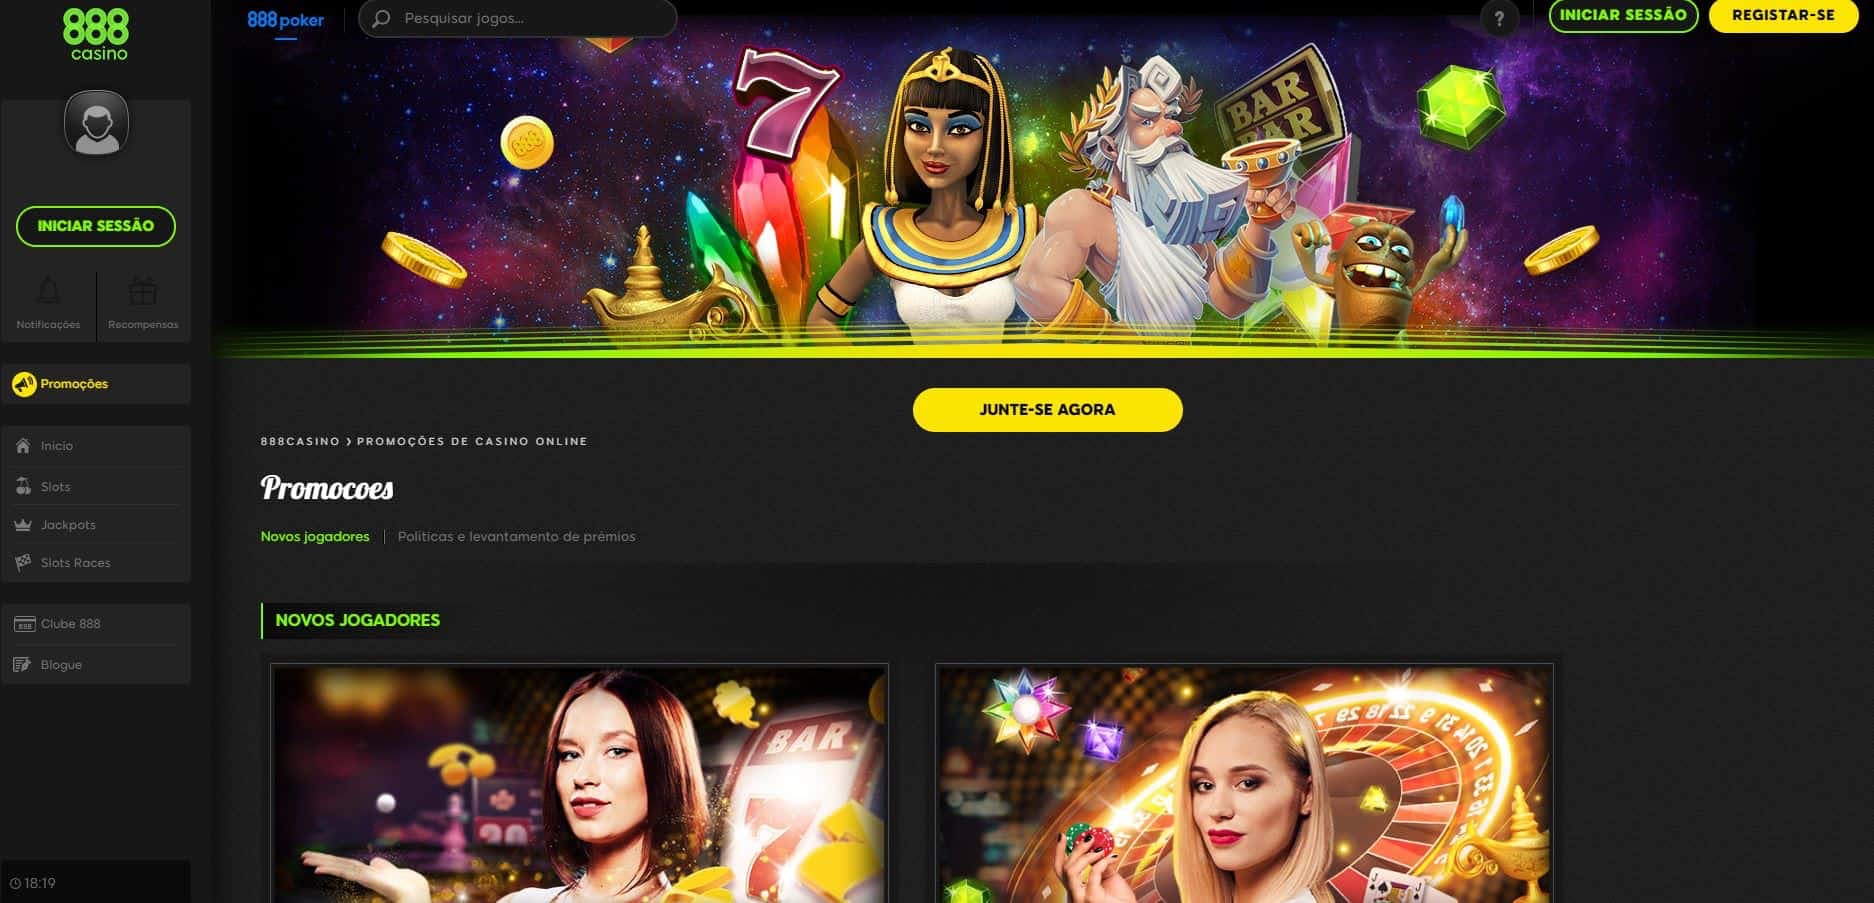 888 Casino offers its players various bonuses and promotions